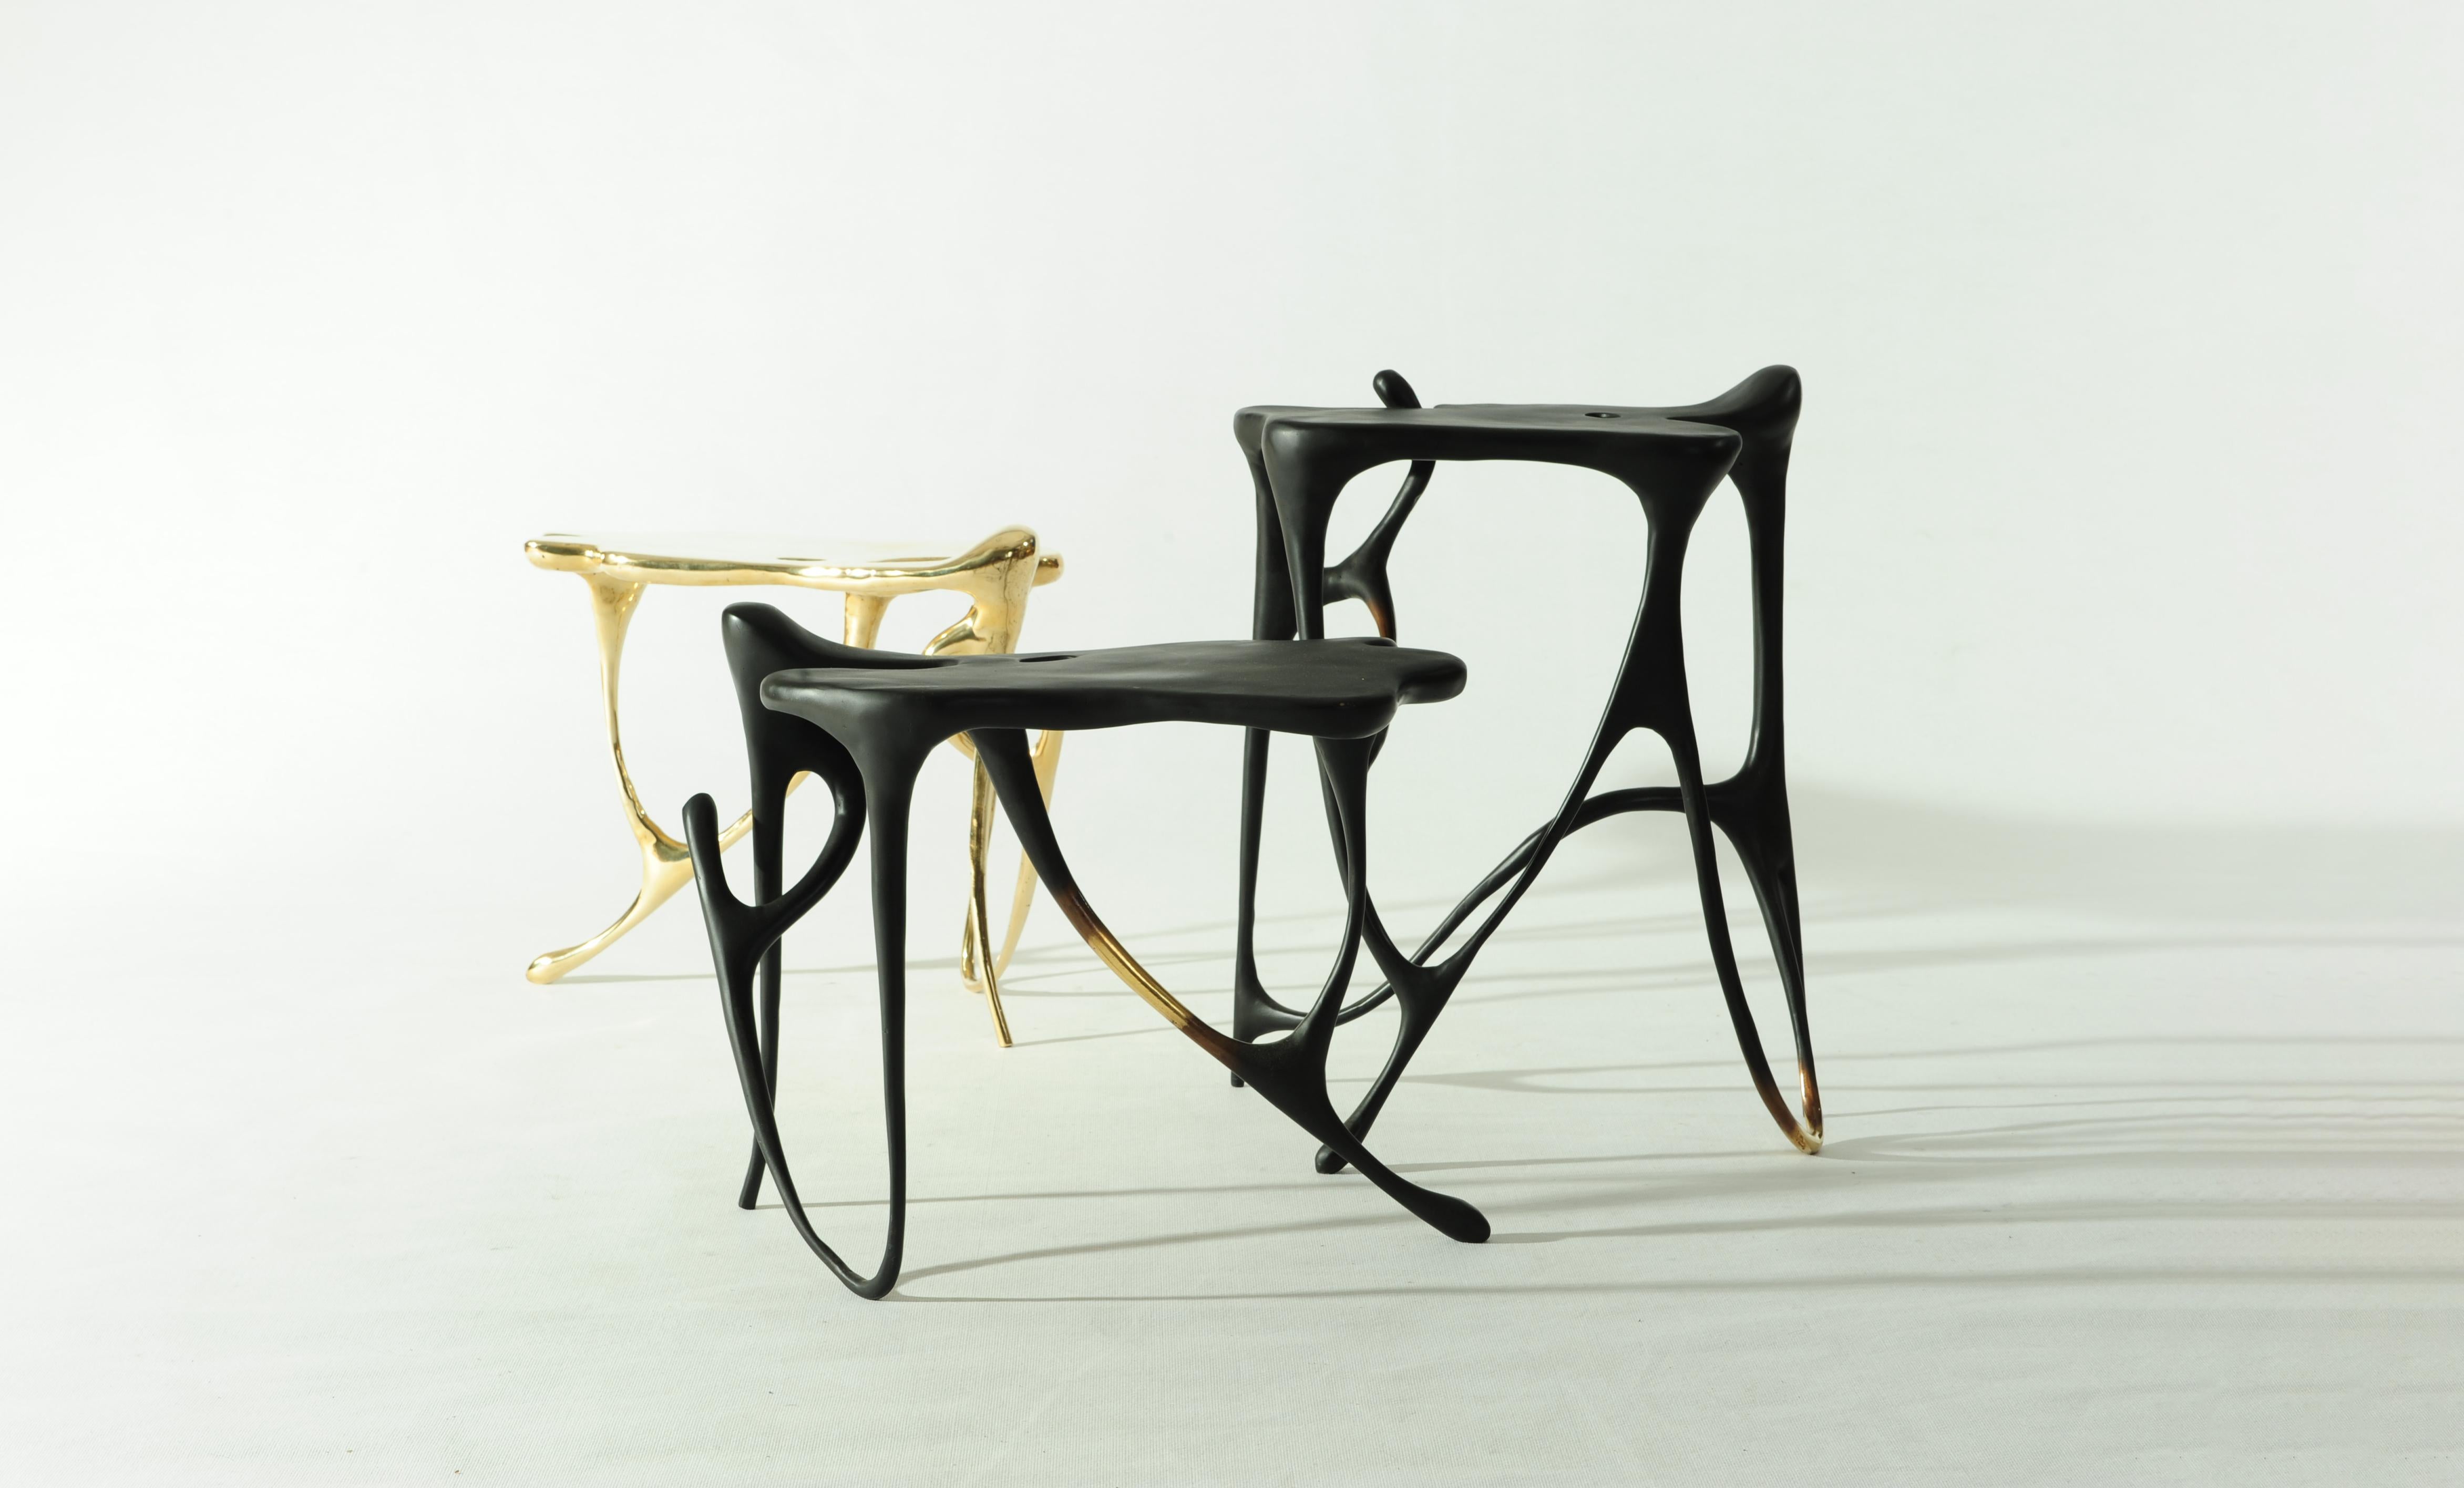 Calligraphic Sculpted Brass Side Table by Misaya 5